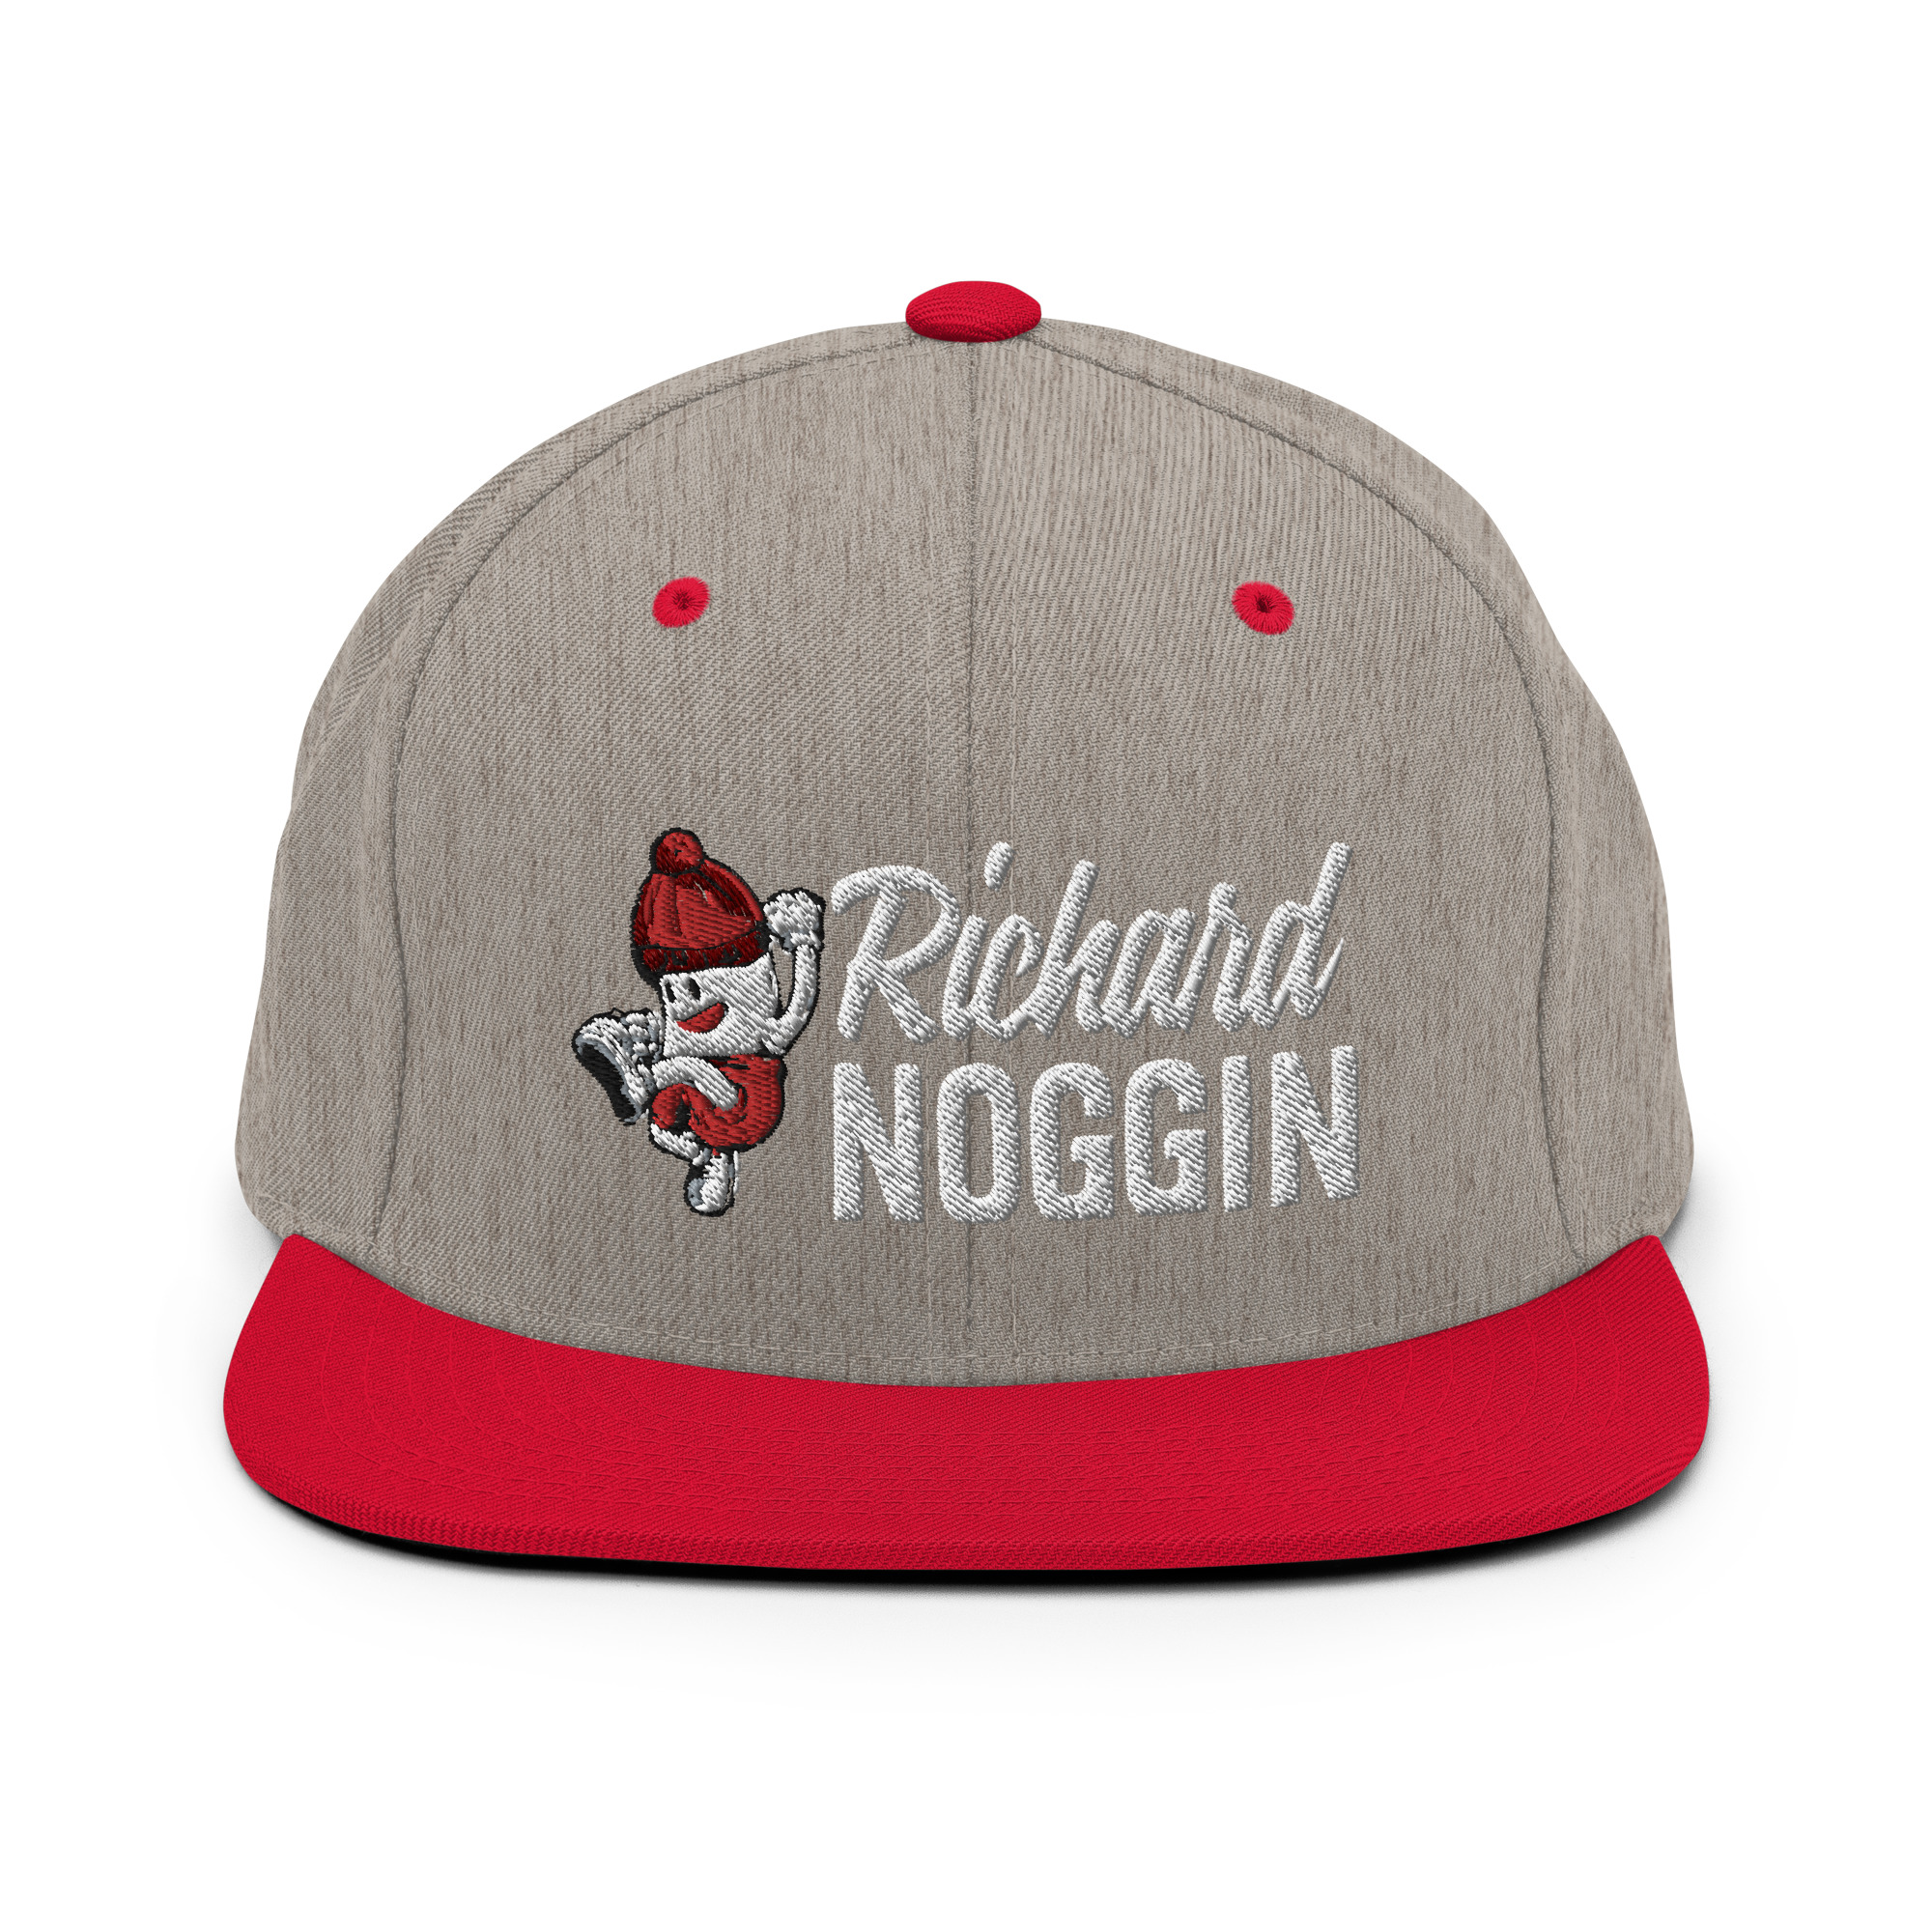 classic-snapback-heather-grey-red-front-6464c4a6e2770.jpg